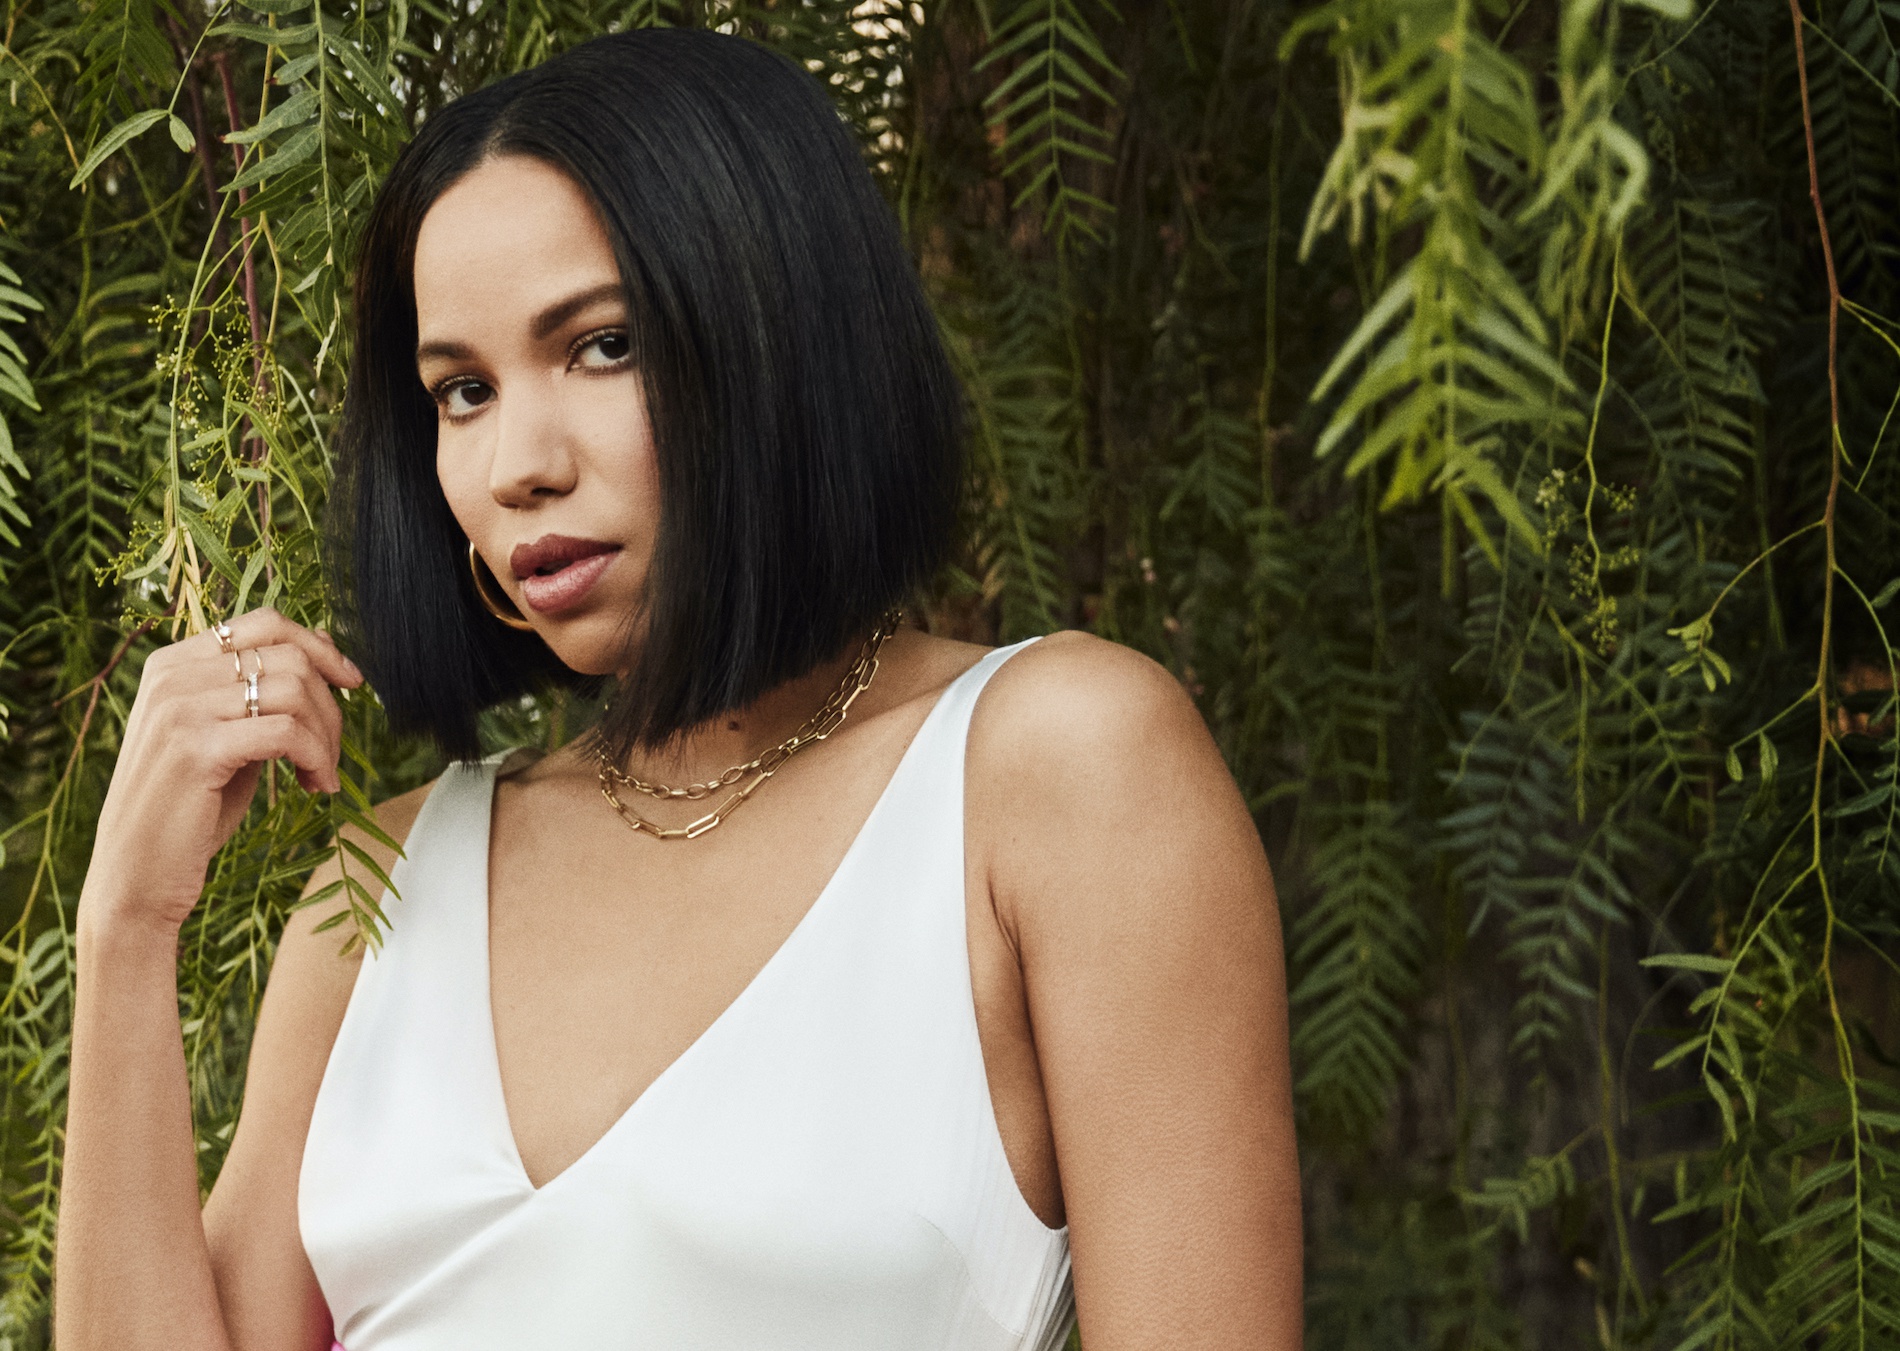 Jurnee Smollett’s Storied Road to ‘Lovecraft Country’ + Making Art With a Message